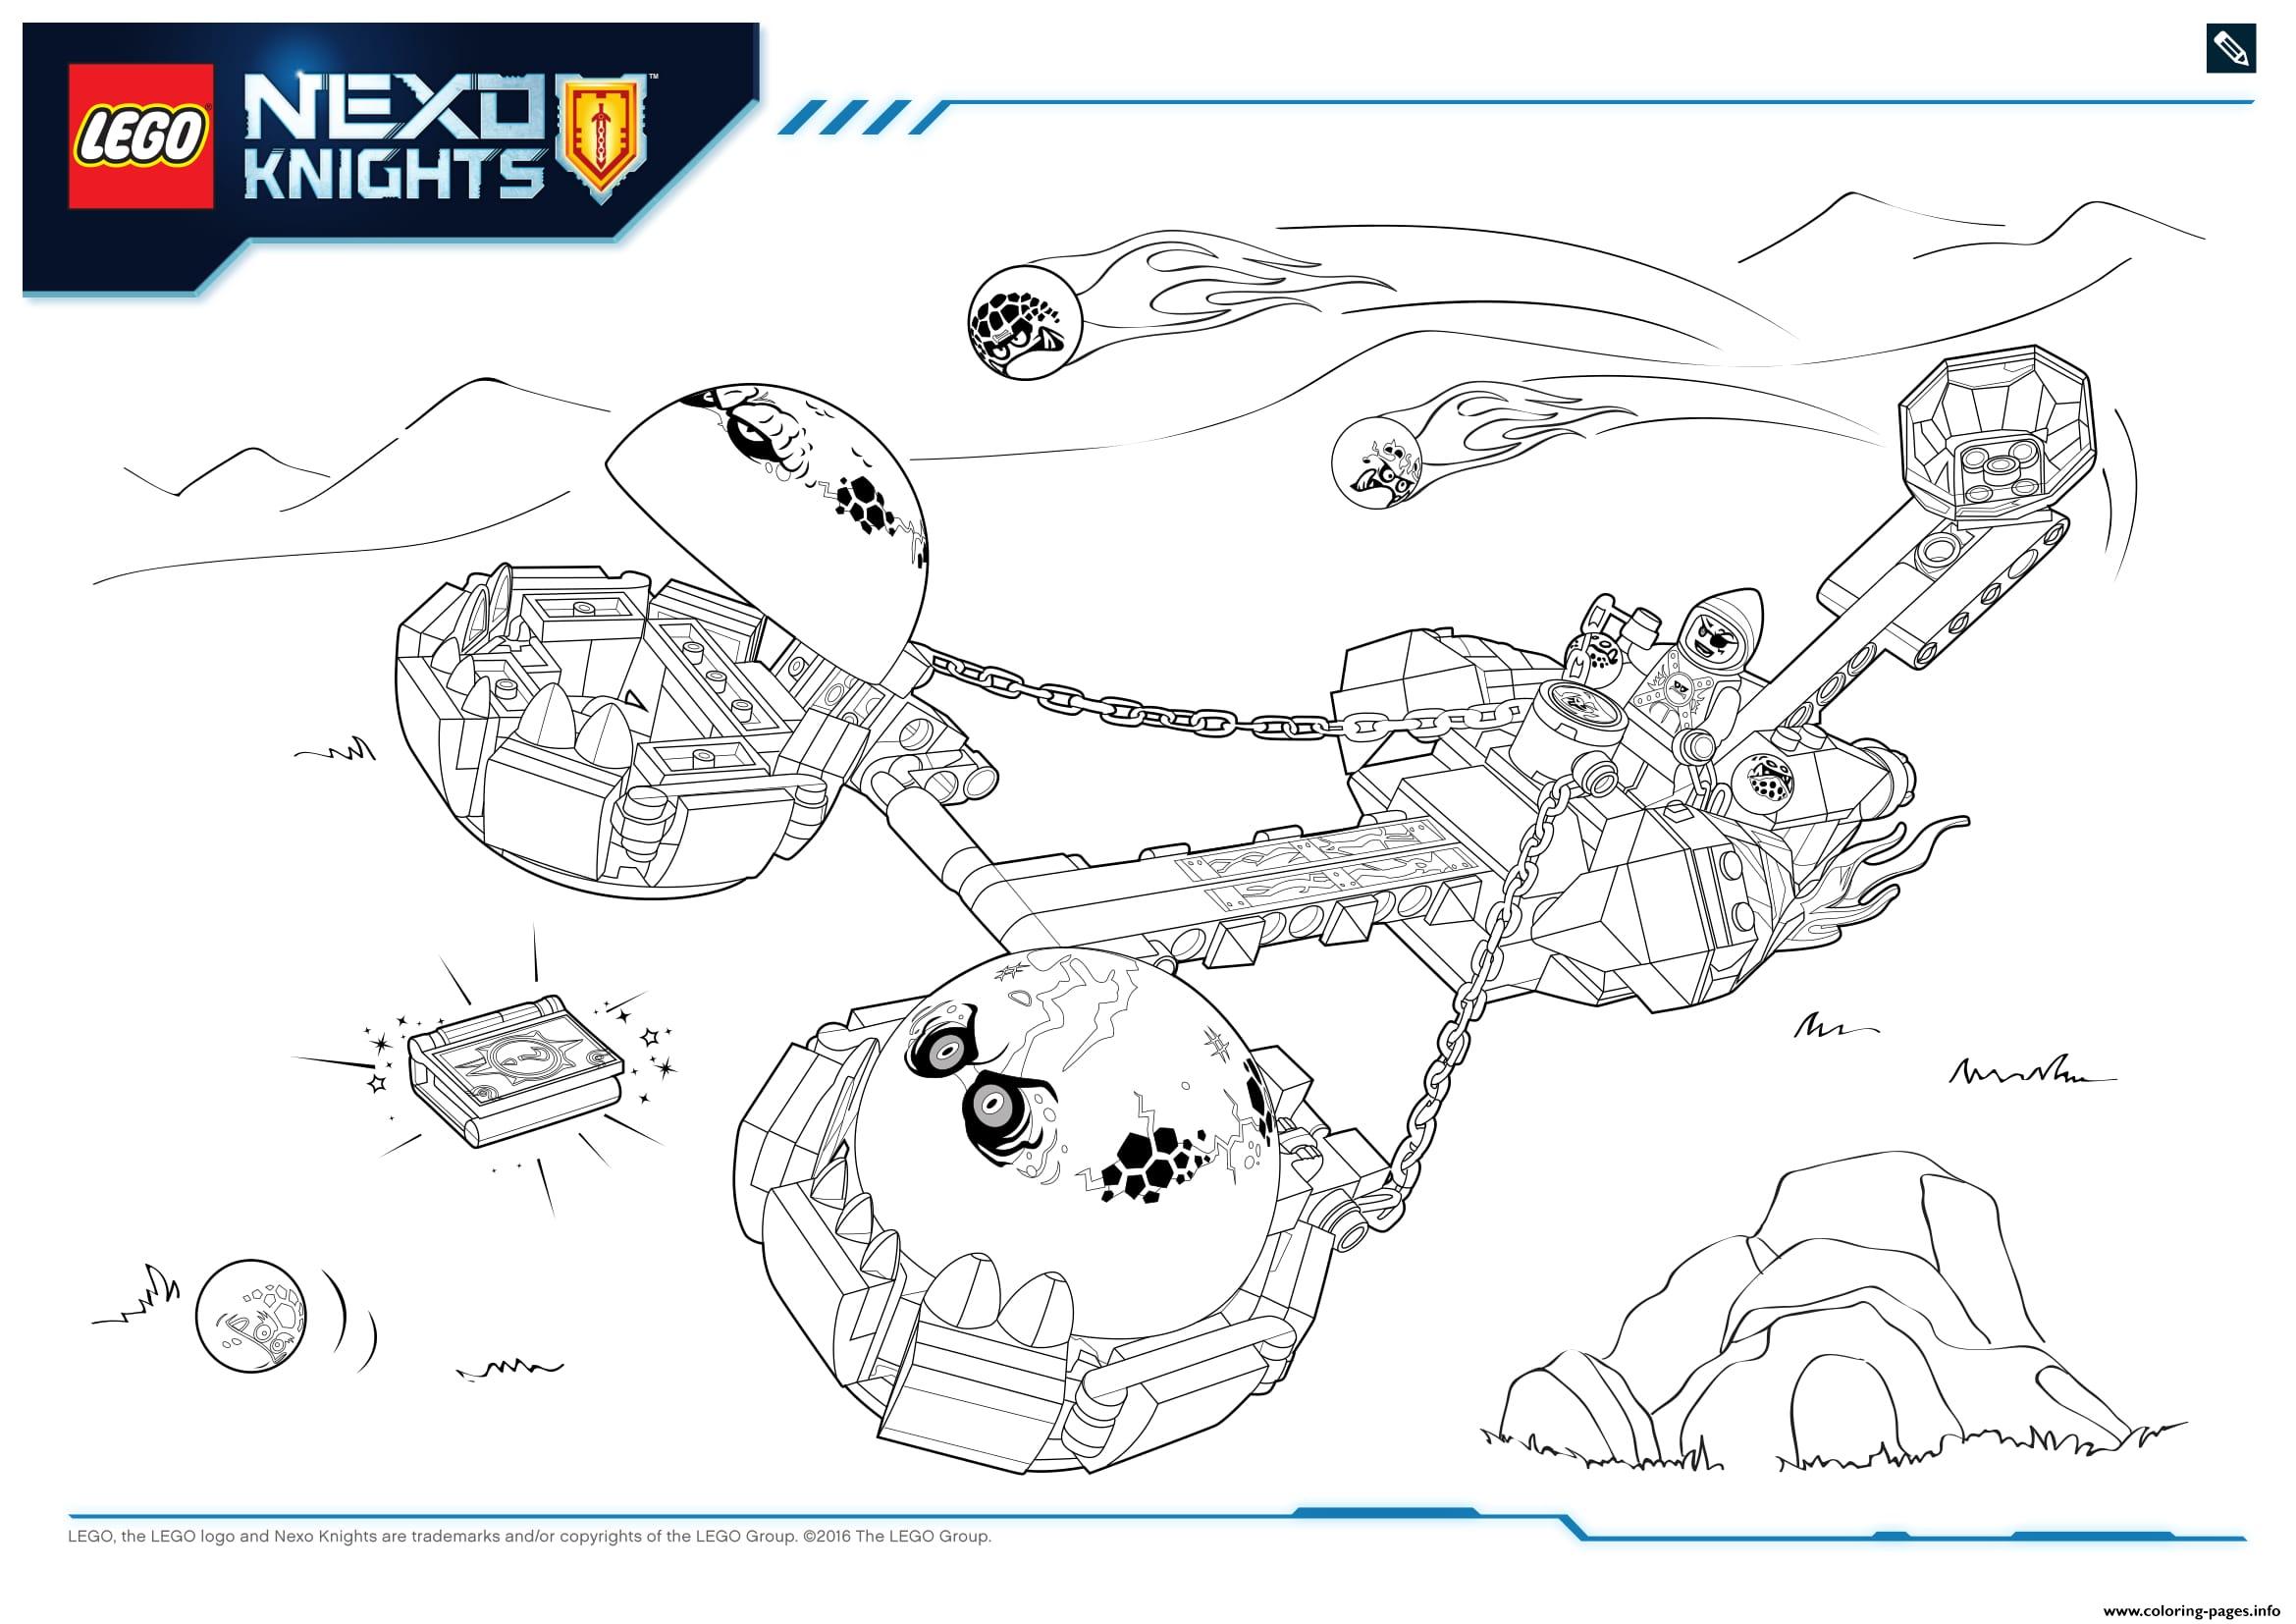 Lego Nexo Knights Monster Productss 2 Coloring Pages Printable